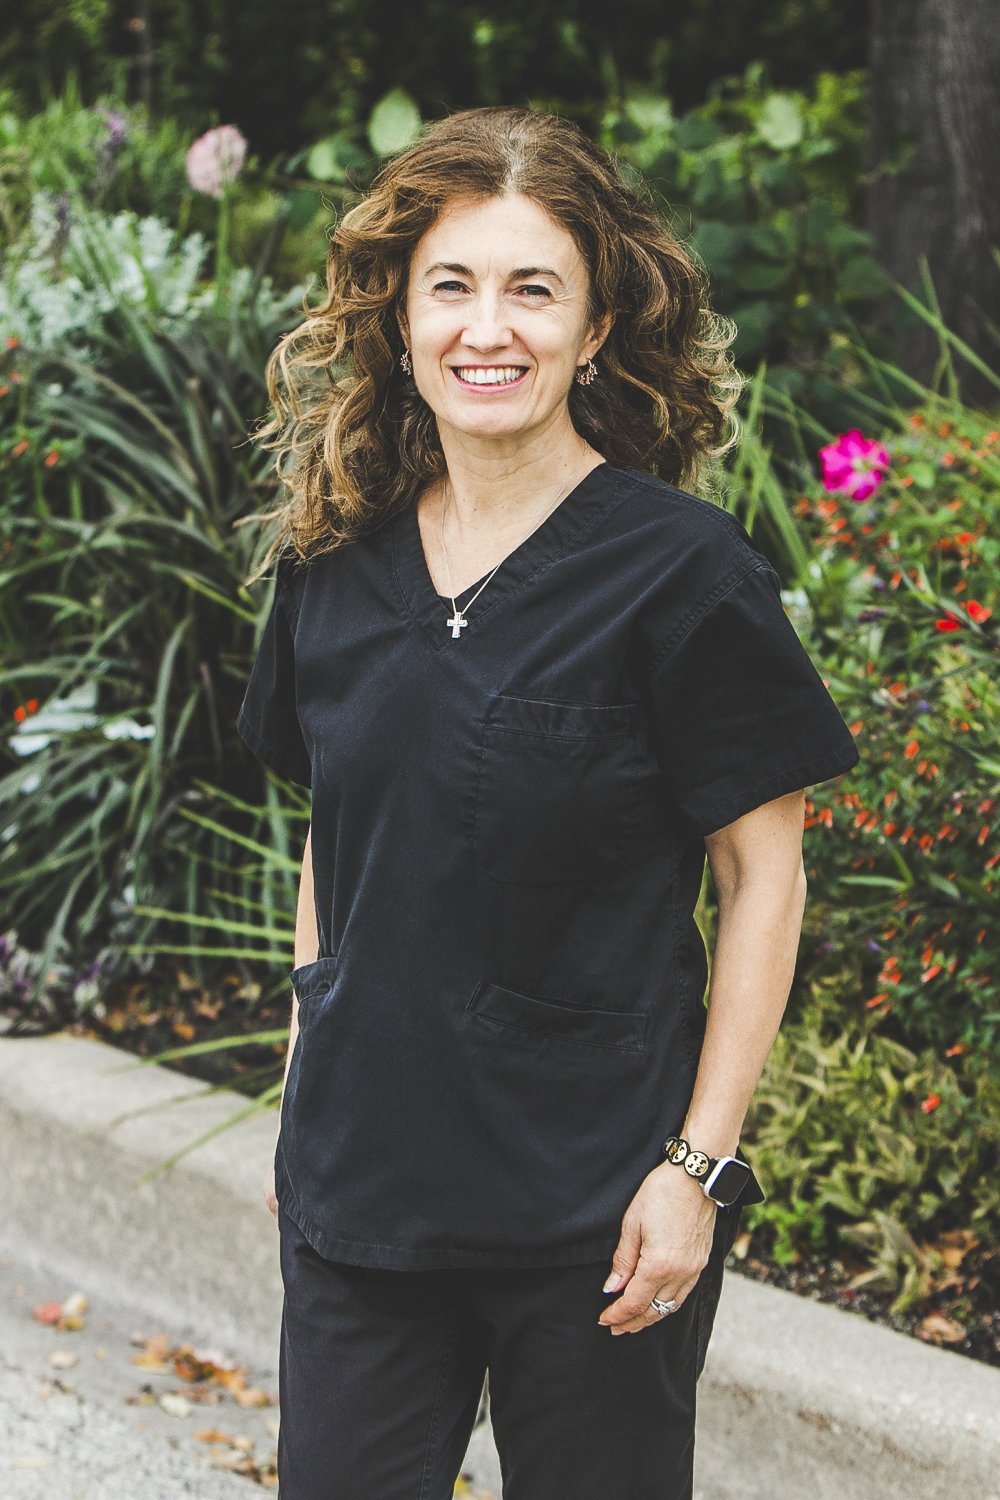 A woman with a fair complexion with slightly-curly shoulder-length brown hair with highlights wearing a dark-grey medical outfit is seen standing in front of an urban garden on a bright summer day